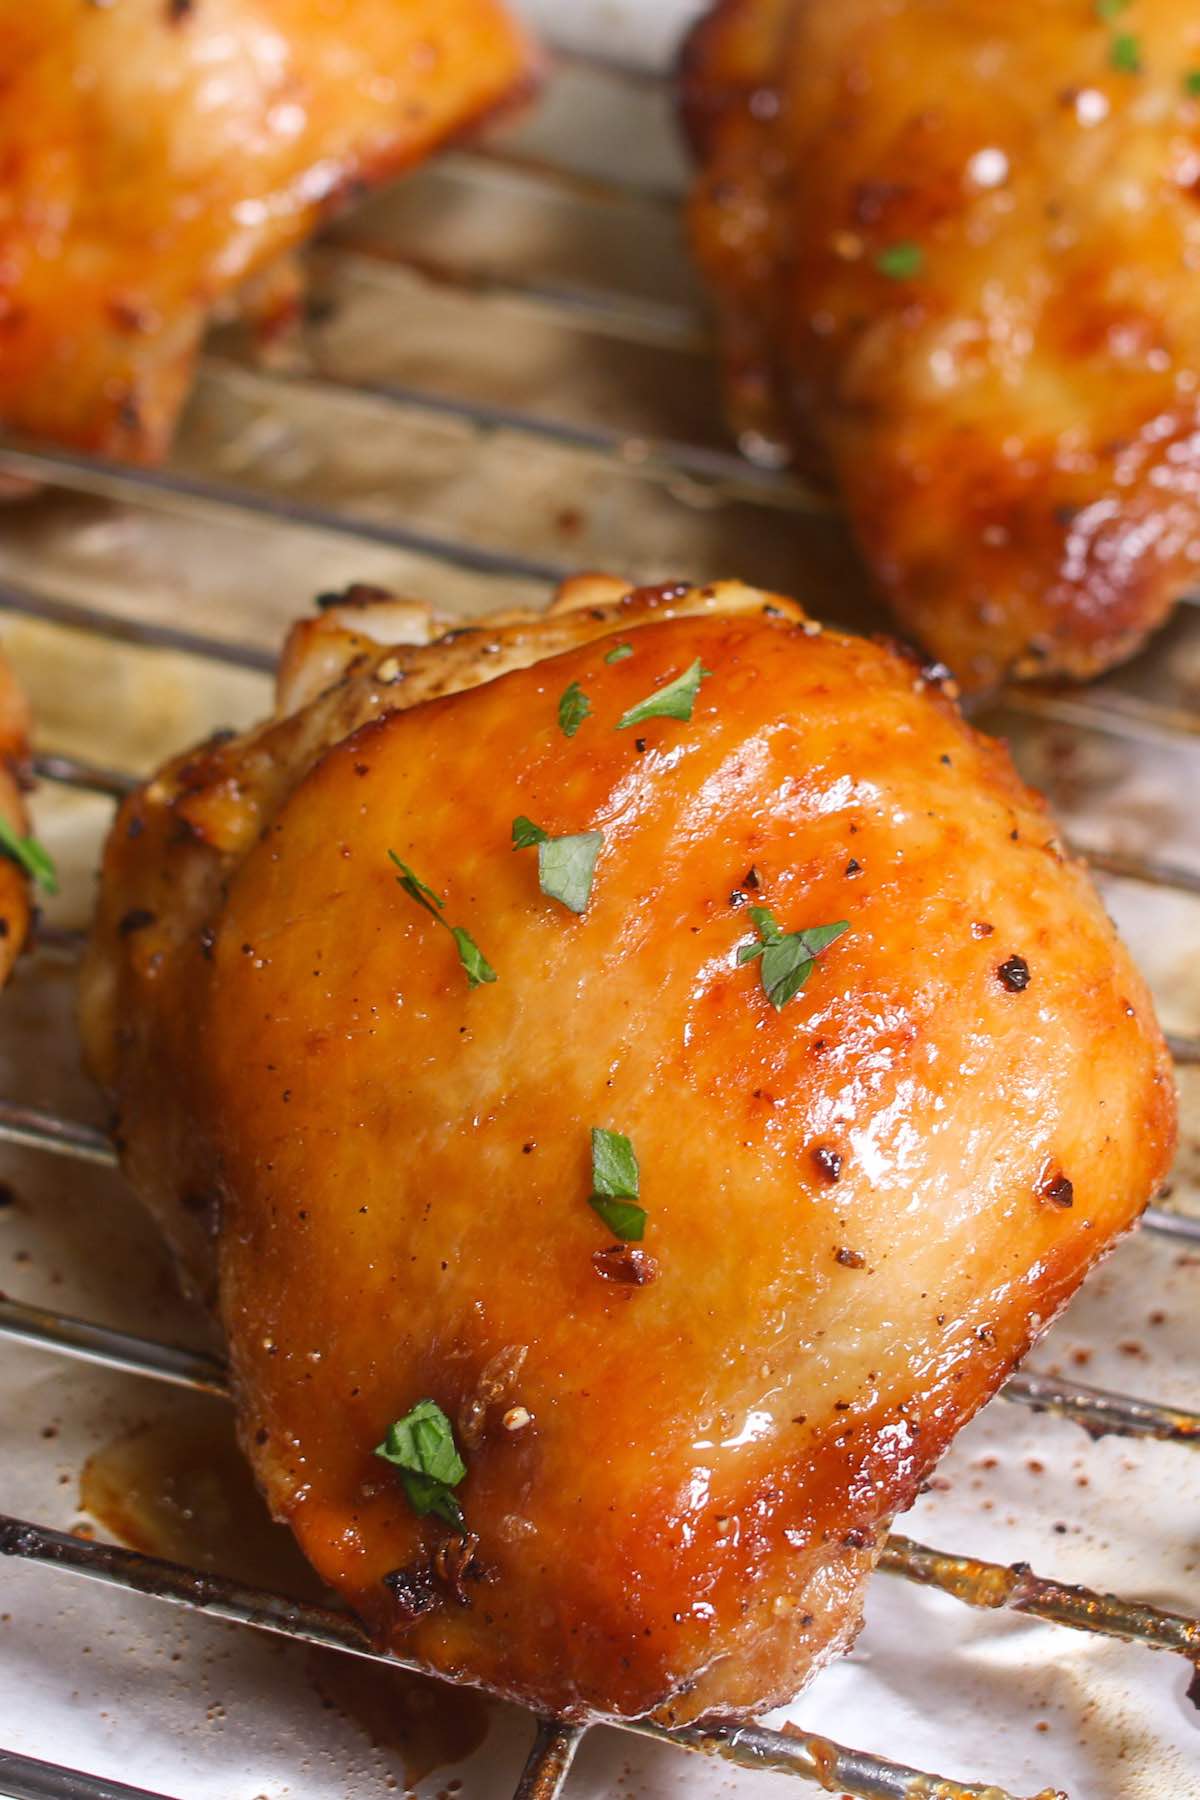 Oven Baked Chicken Thighs are crispy on the outside with tender dark meat on the inside. These baked chicken thighs are a quick and easy main dish with delicious soy brown sugar flavors. You only need a few minutes of prep for an easy one pan dinner!